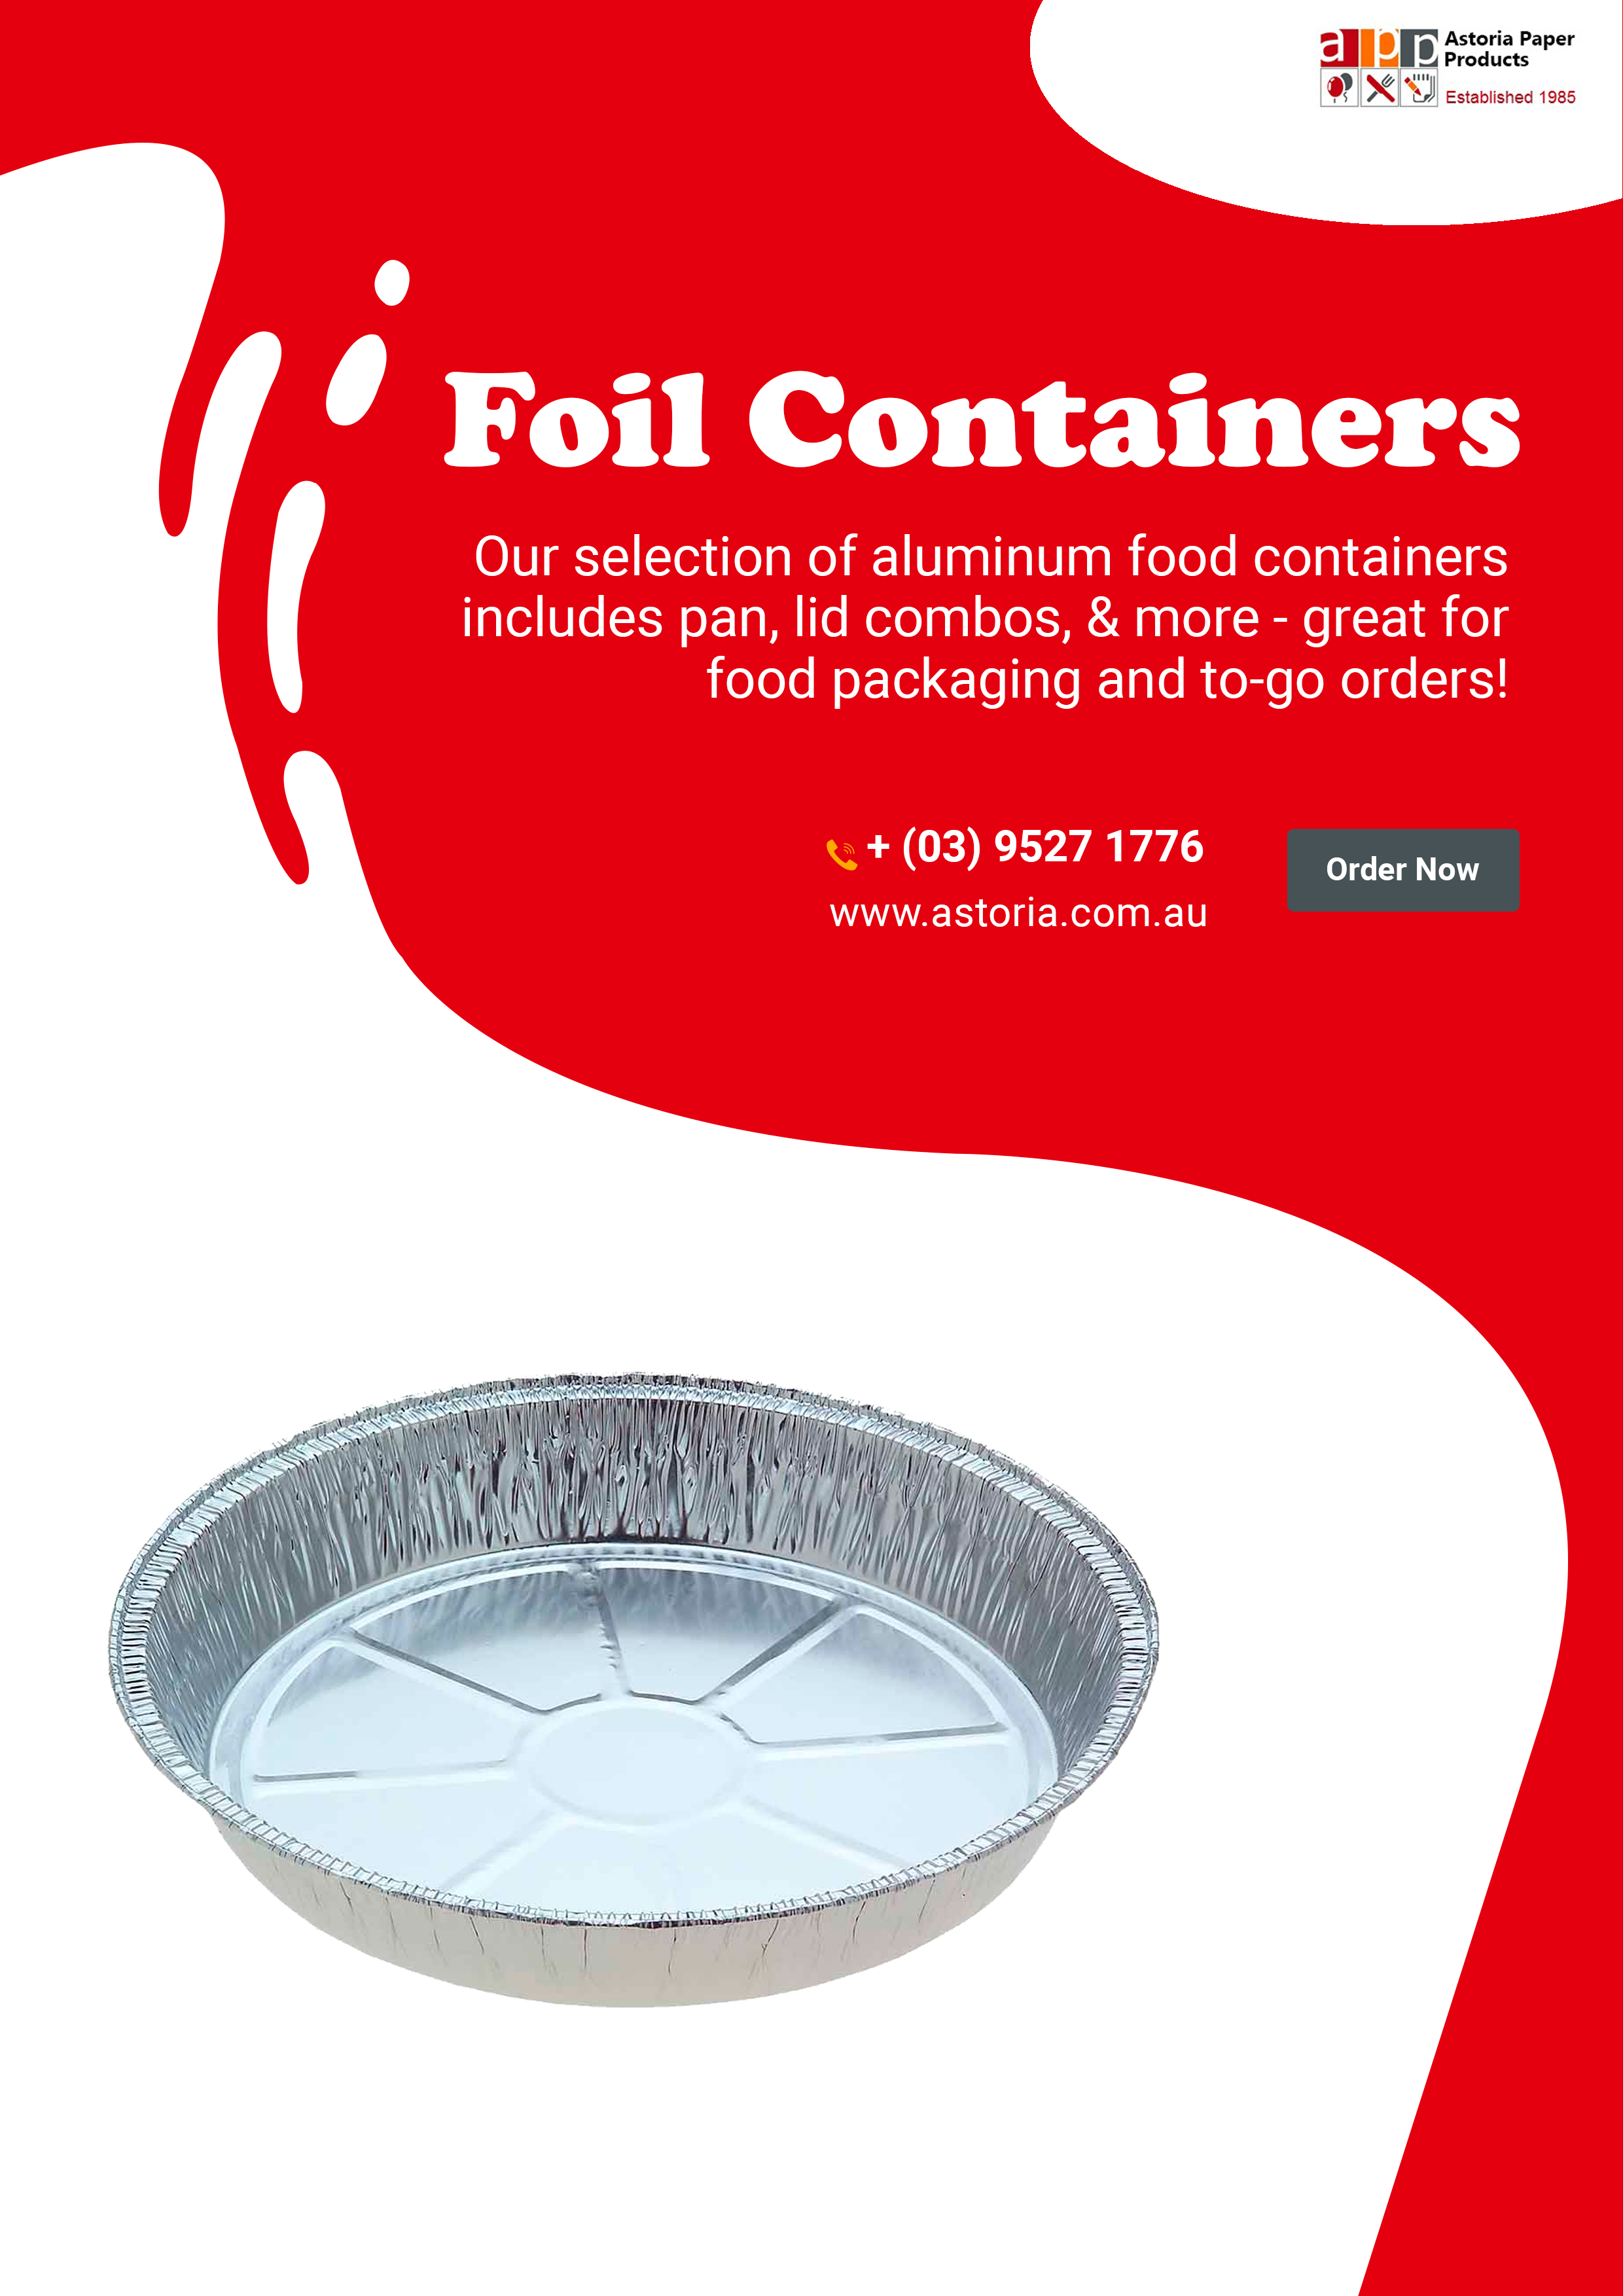 Foil Containers Supplier In Melbourne | Baking Container | Astoria Paper Products